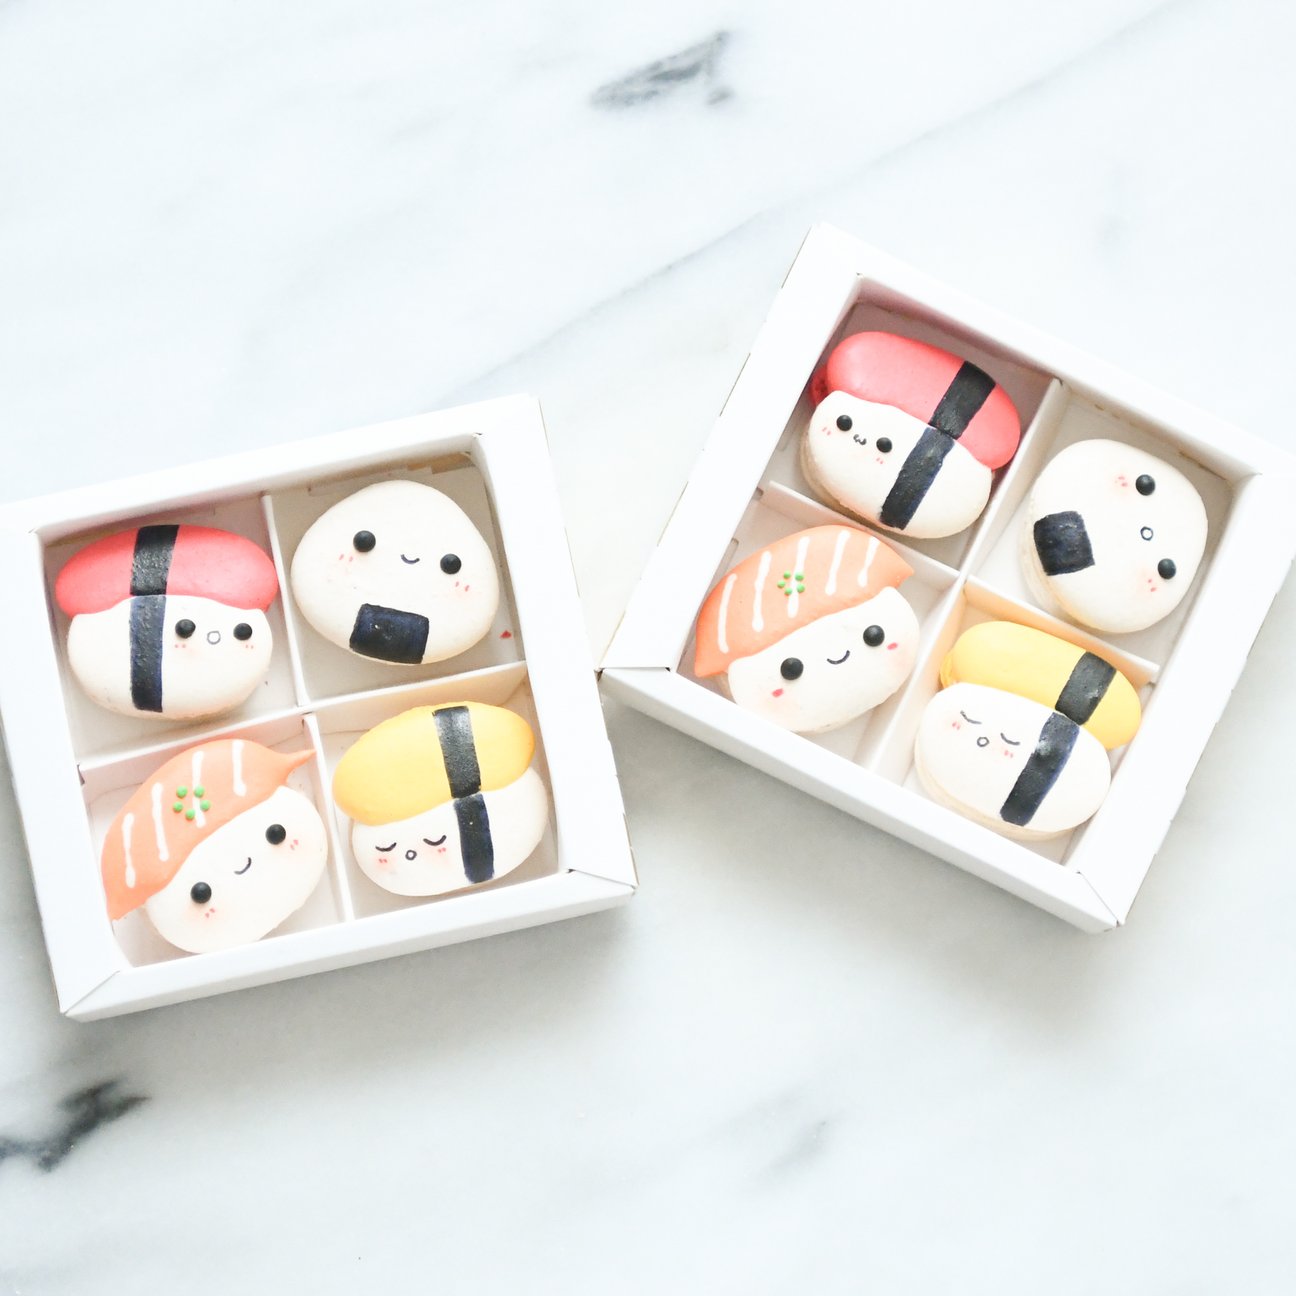 Gift Bundle Sales | 'HAPPY BOX' Version 2 | 2 x Macarons Gift Box + 1 x Brownies Gift Box | Limited Qty 1st 100 |  Only $36.80